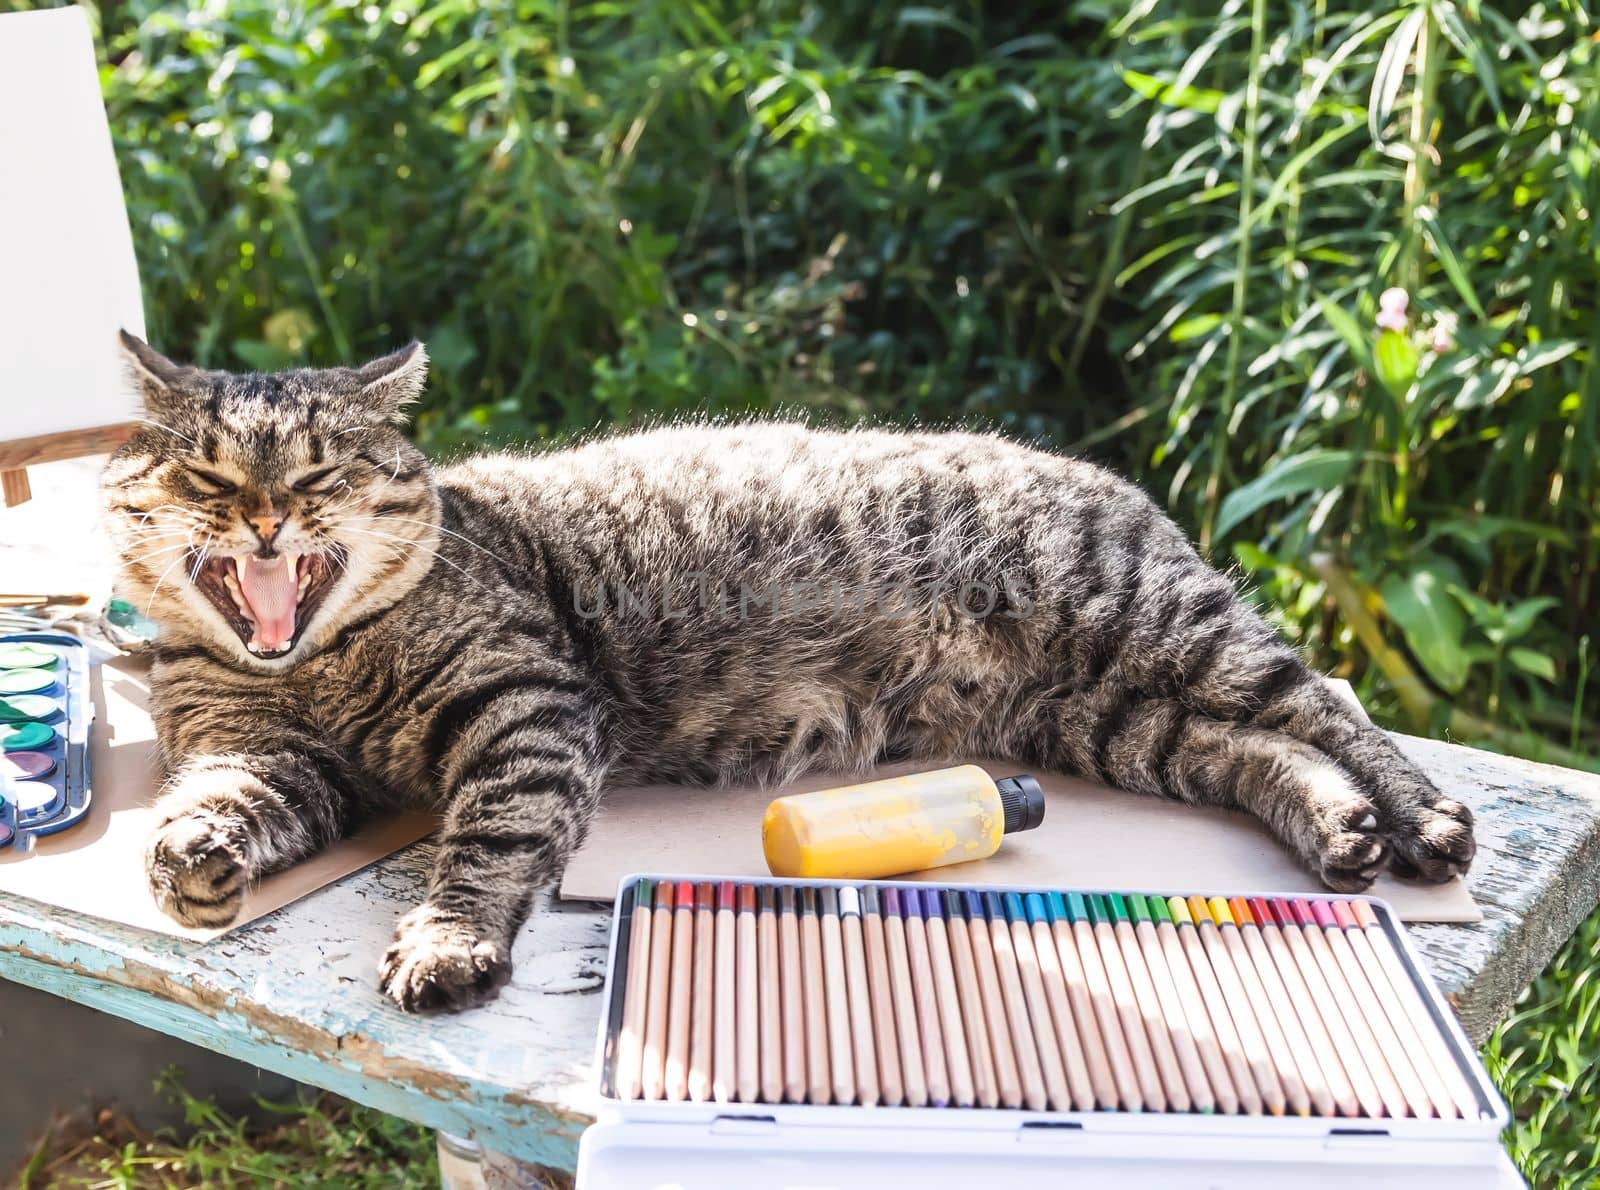 Lazy cat lying on the table with school supplies.